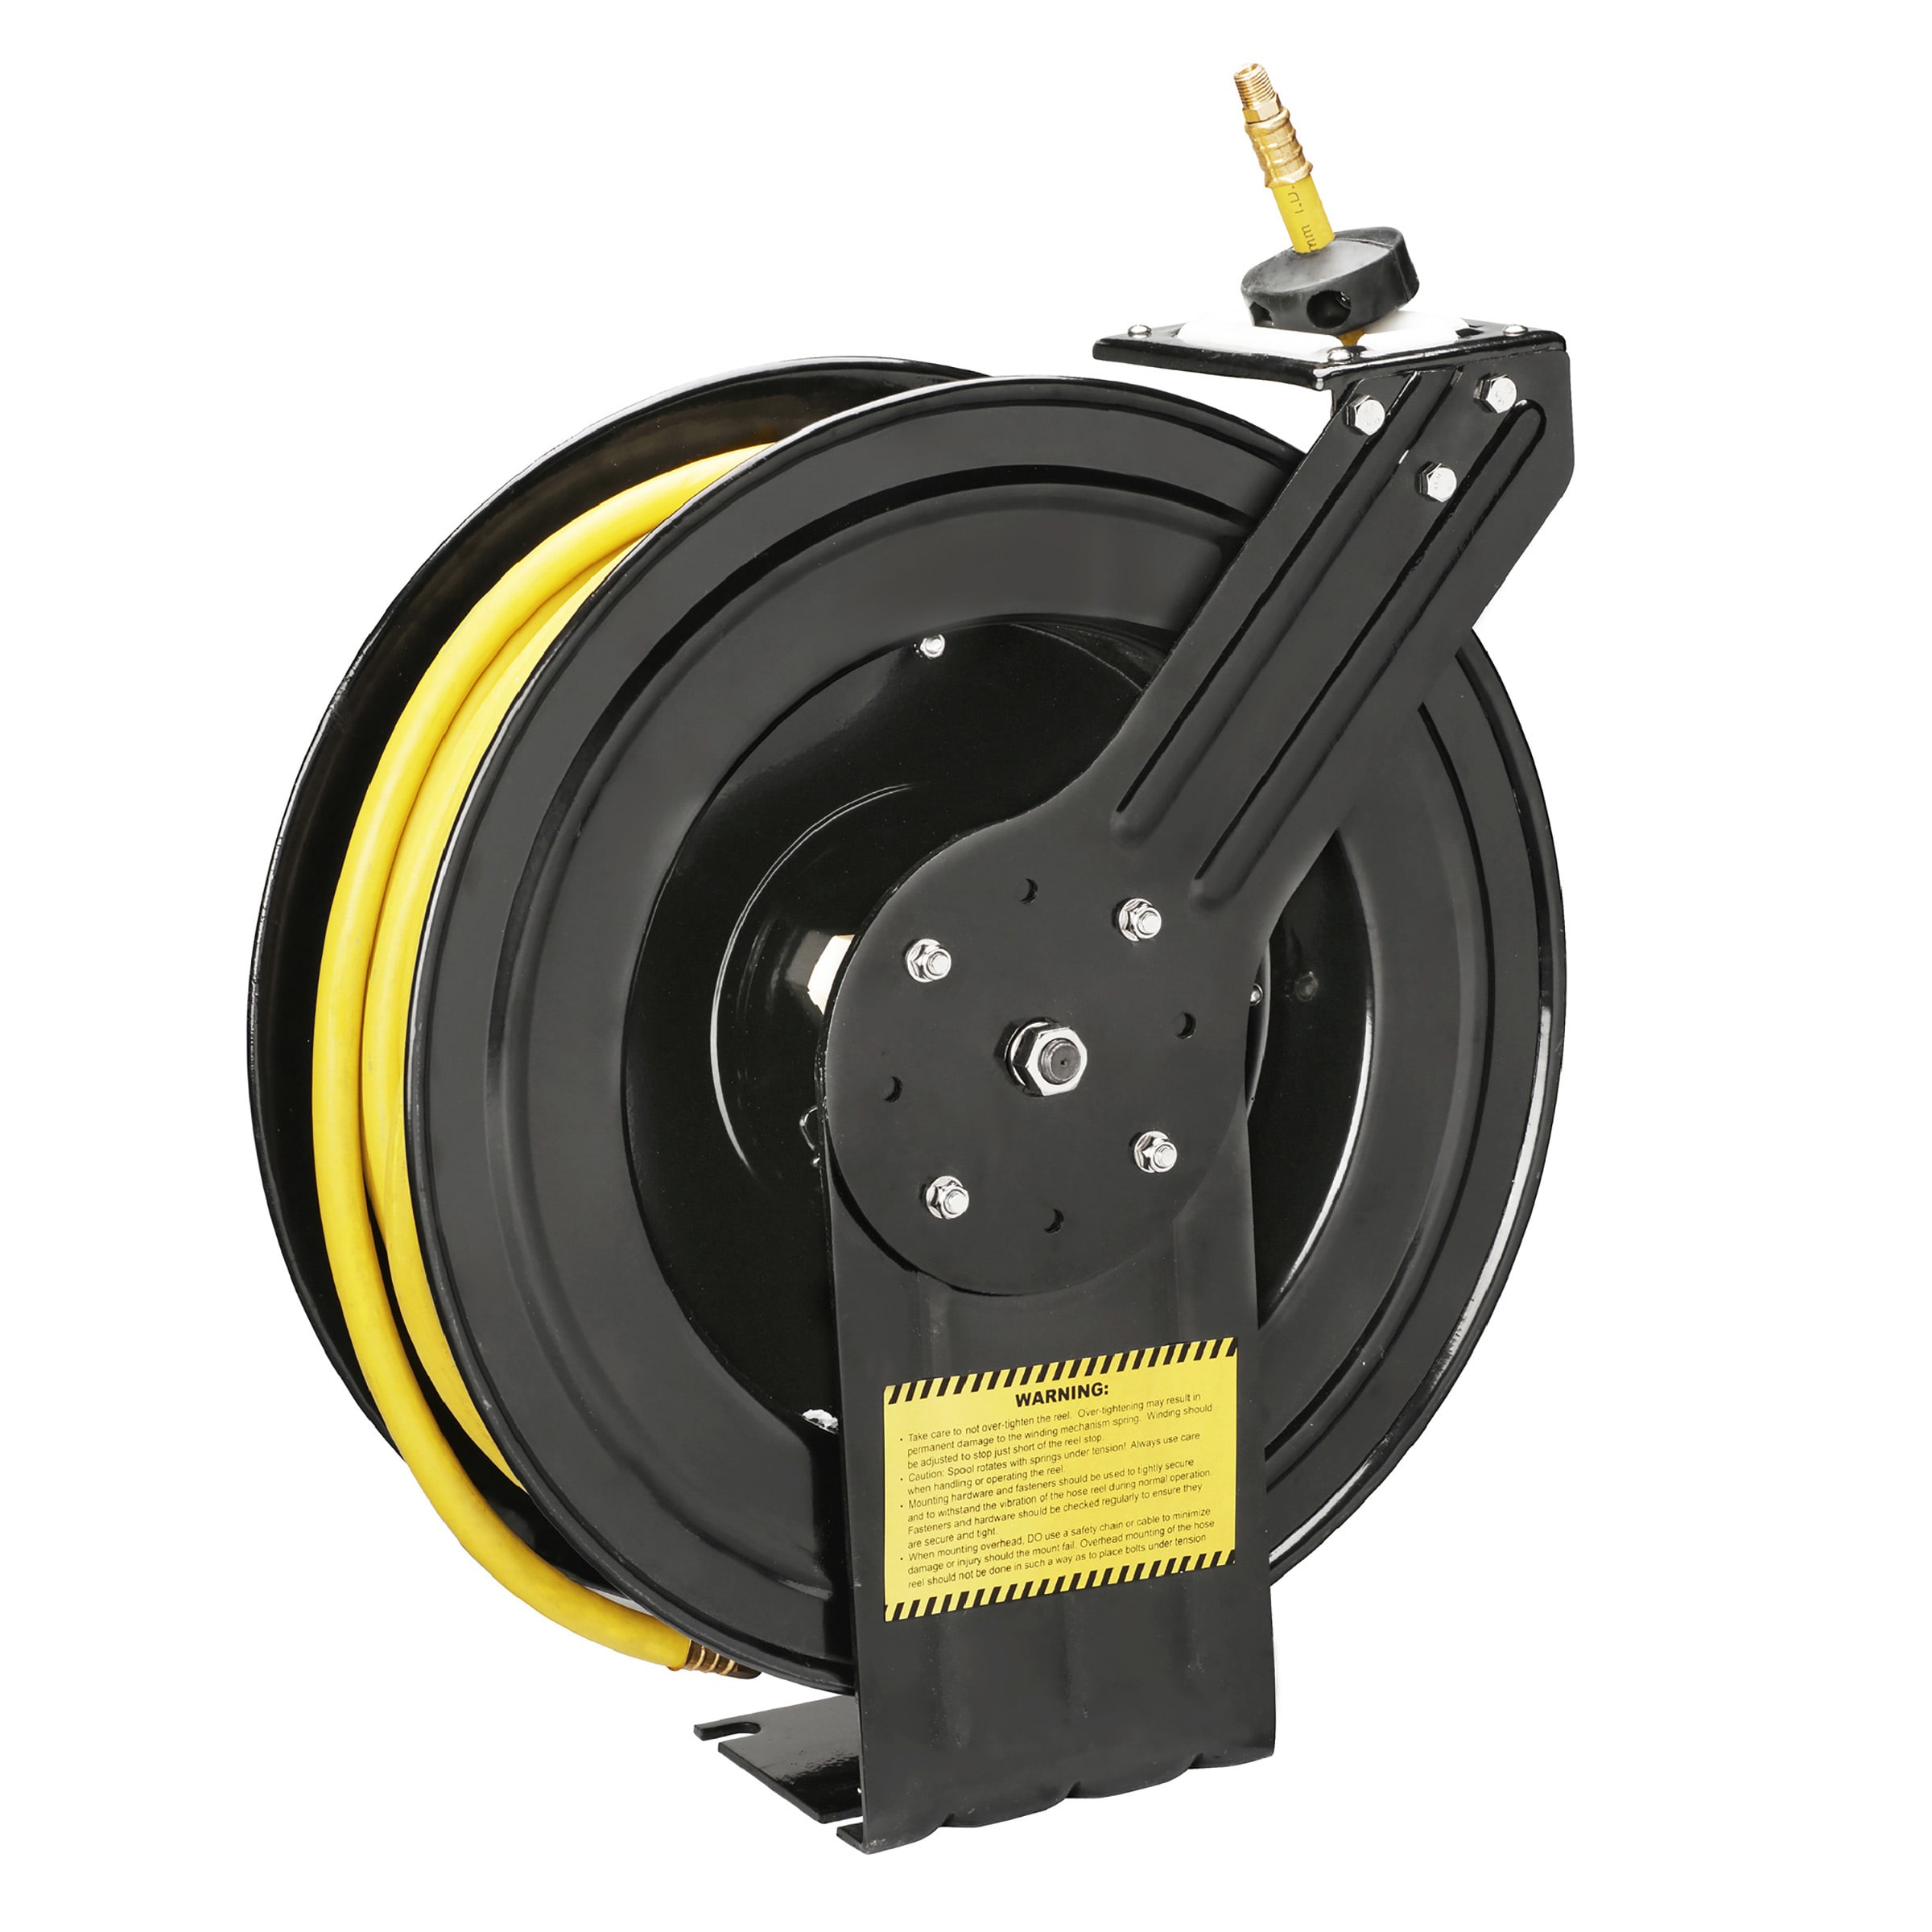 Fleming Supply Retractable Air Hose Reel, 3/8-inch x 100ft Rubber Hose with  300 PSI Max, Wall, Ceiling 761791FMG